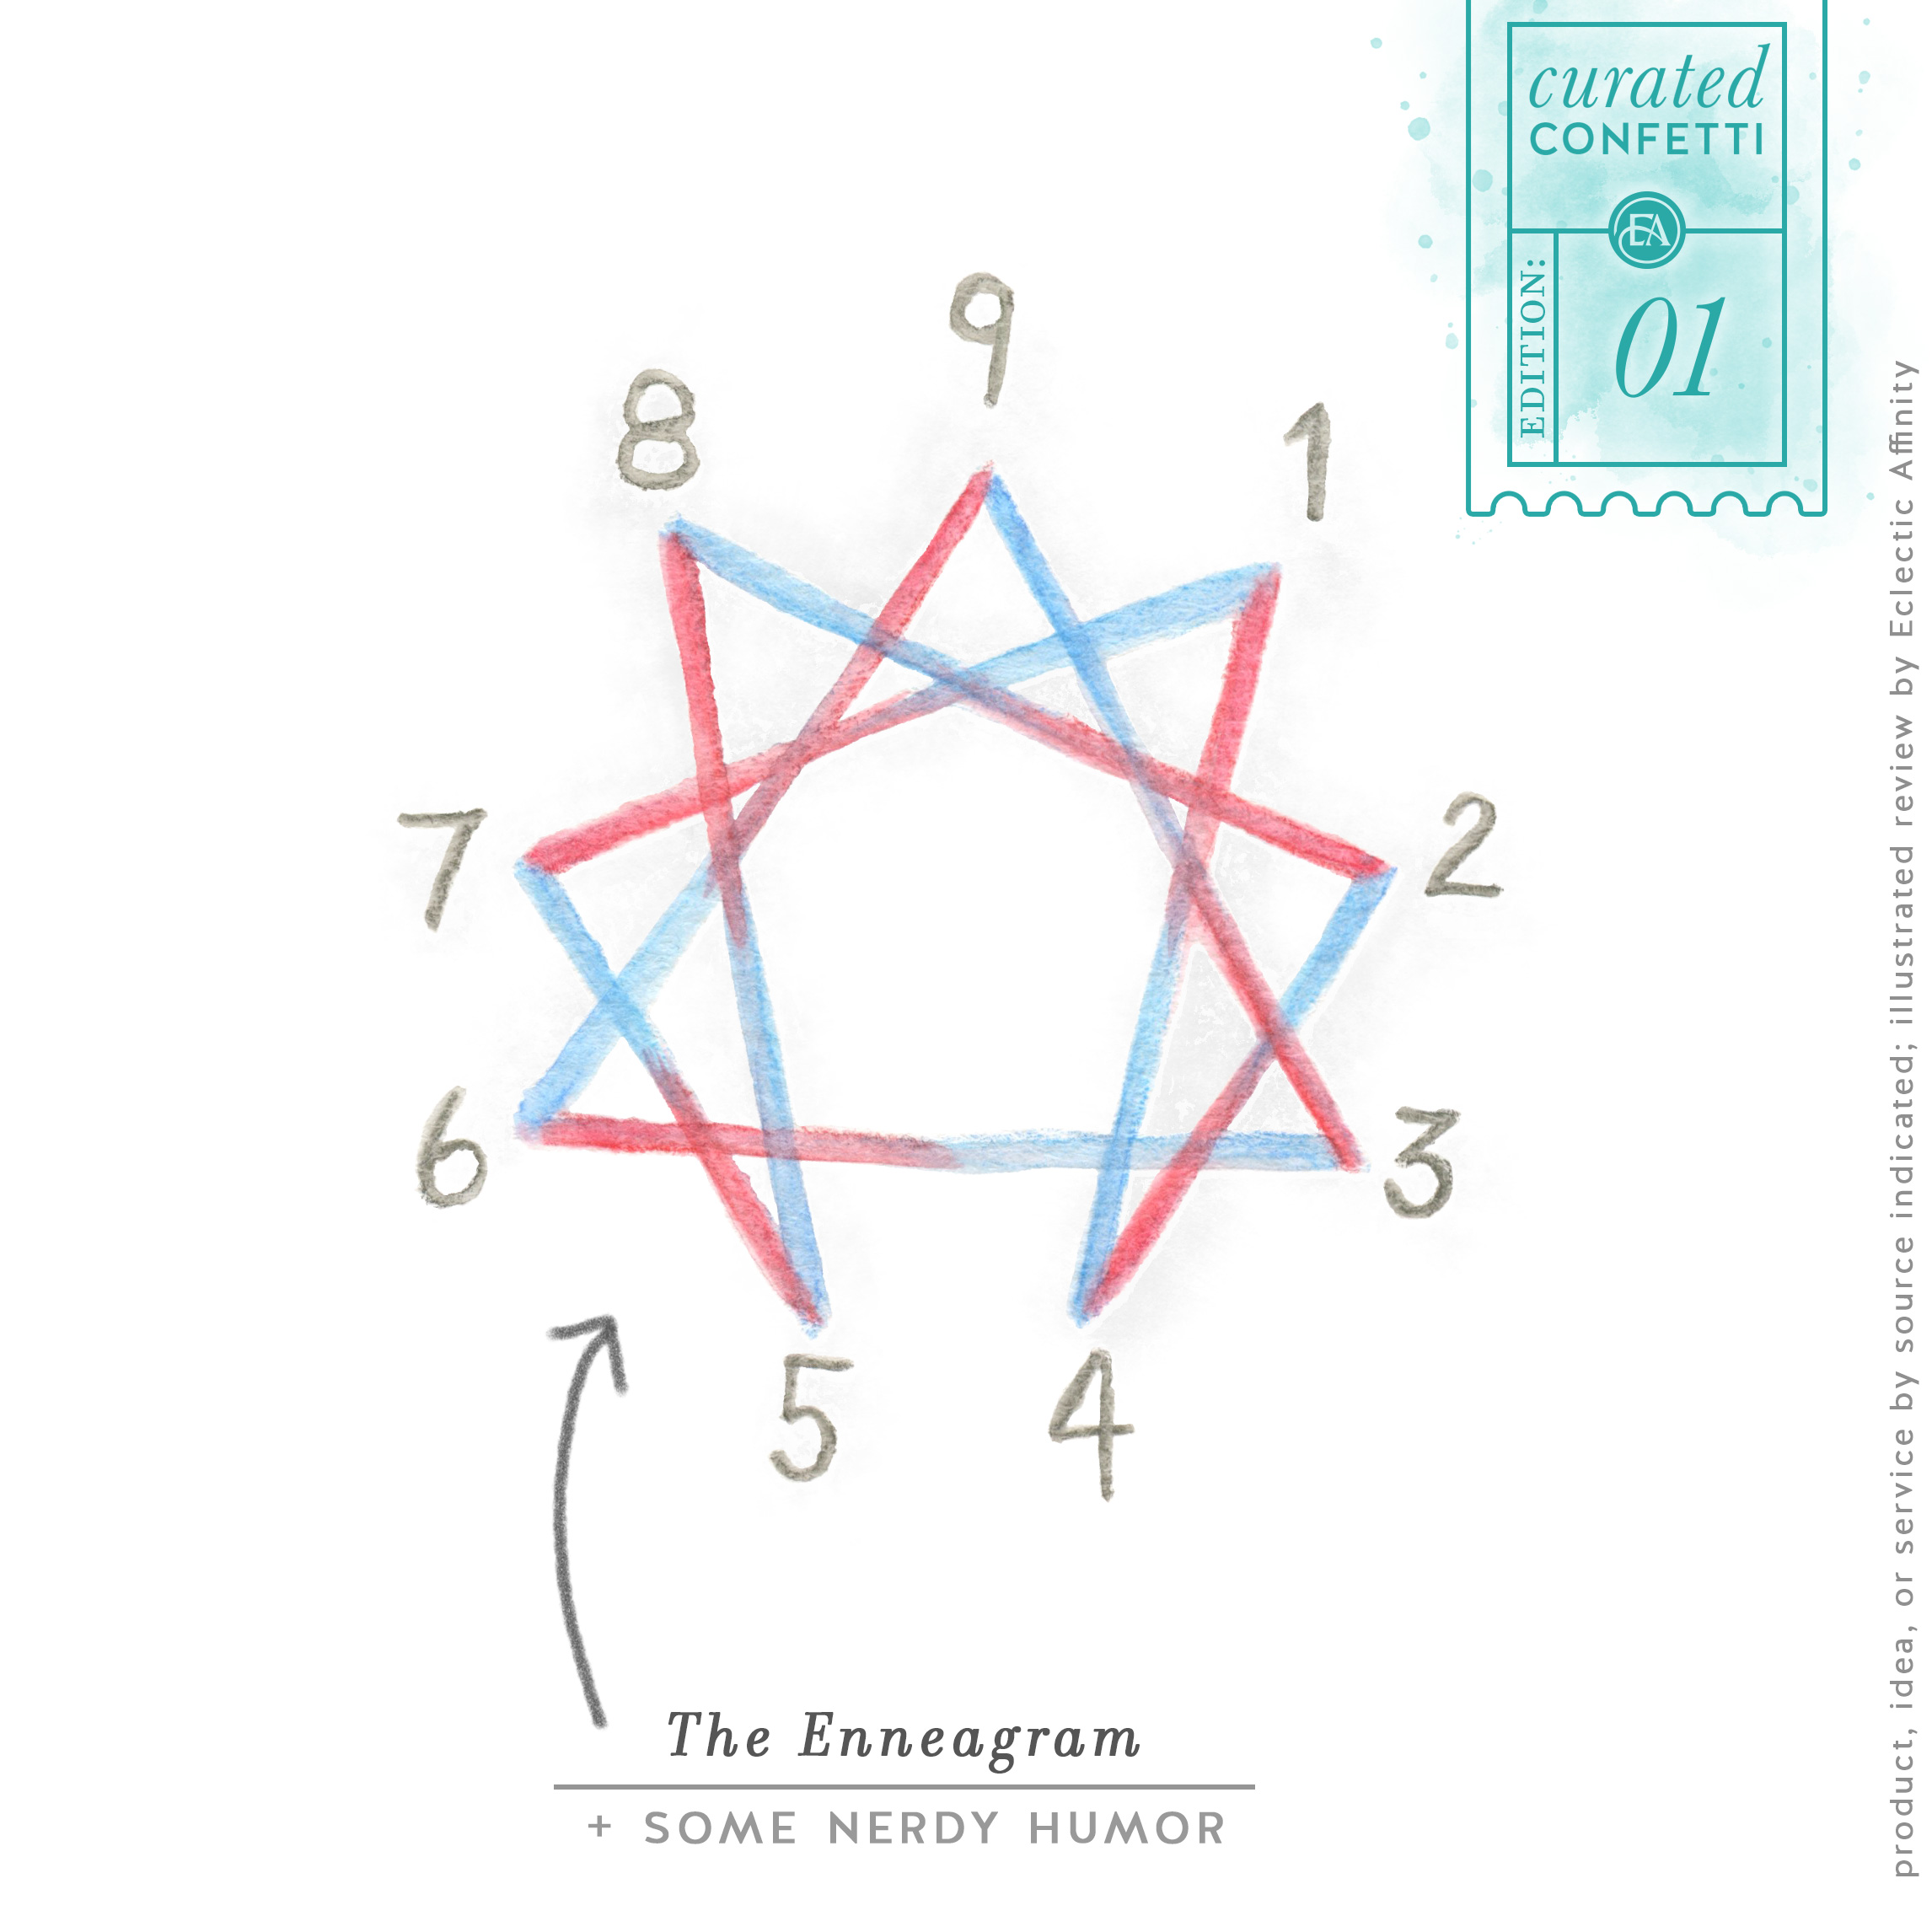 The Enneagram + some nerdy humor.